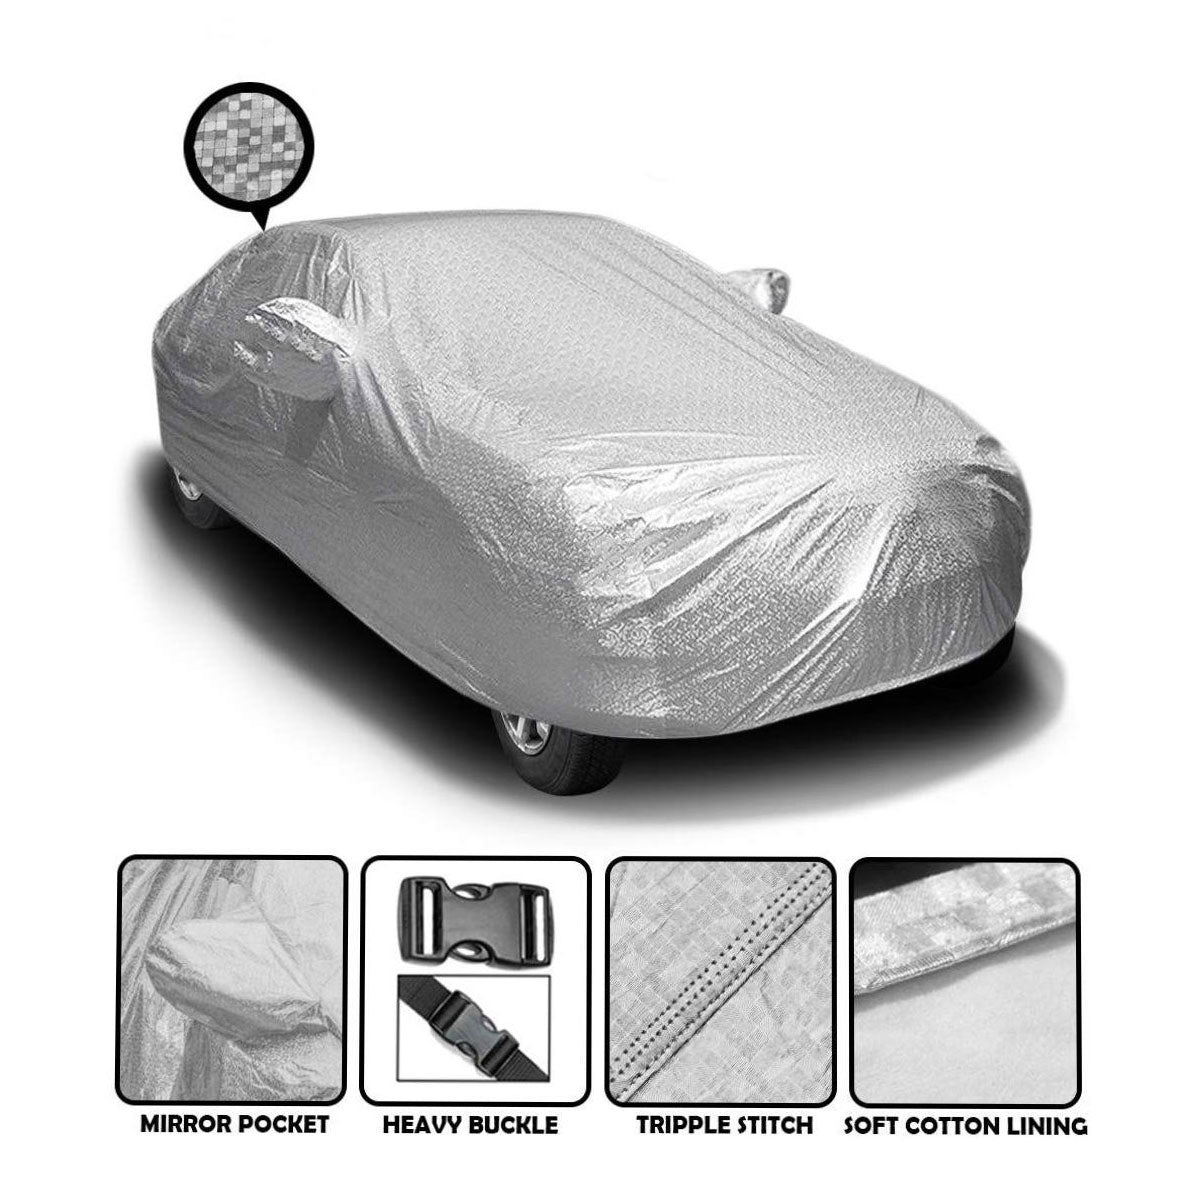 Oshotto Spyro Silver Anti Reflective, dustproof and Water Proof Car Body Cover with Mirror Pockets For Skoda Fabia